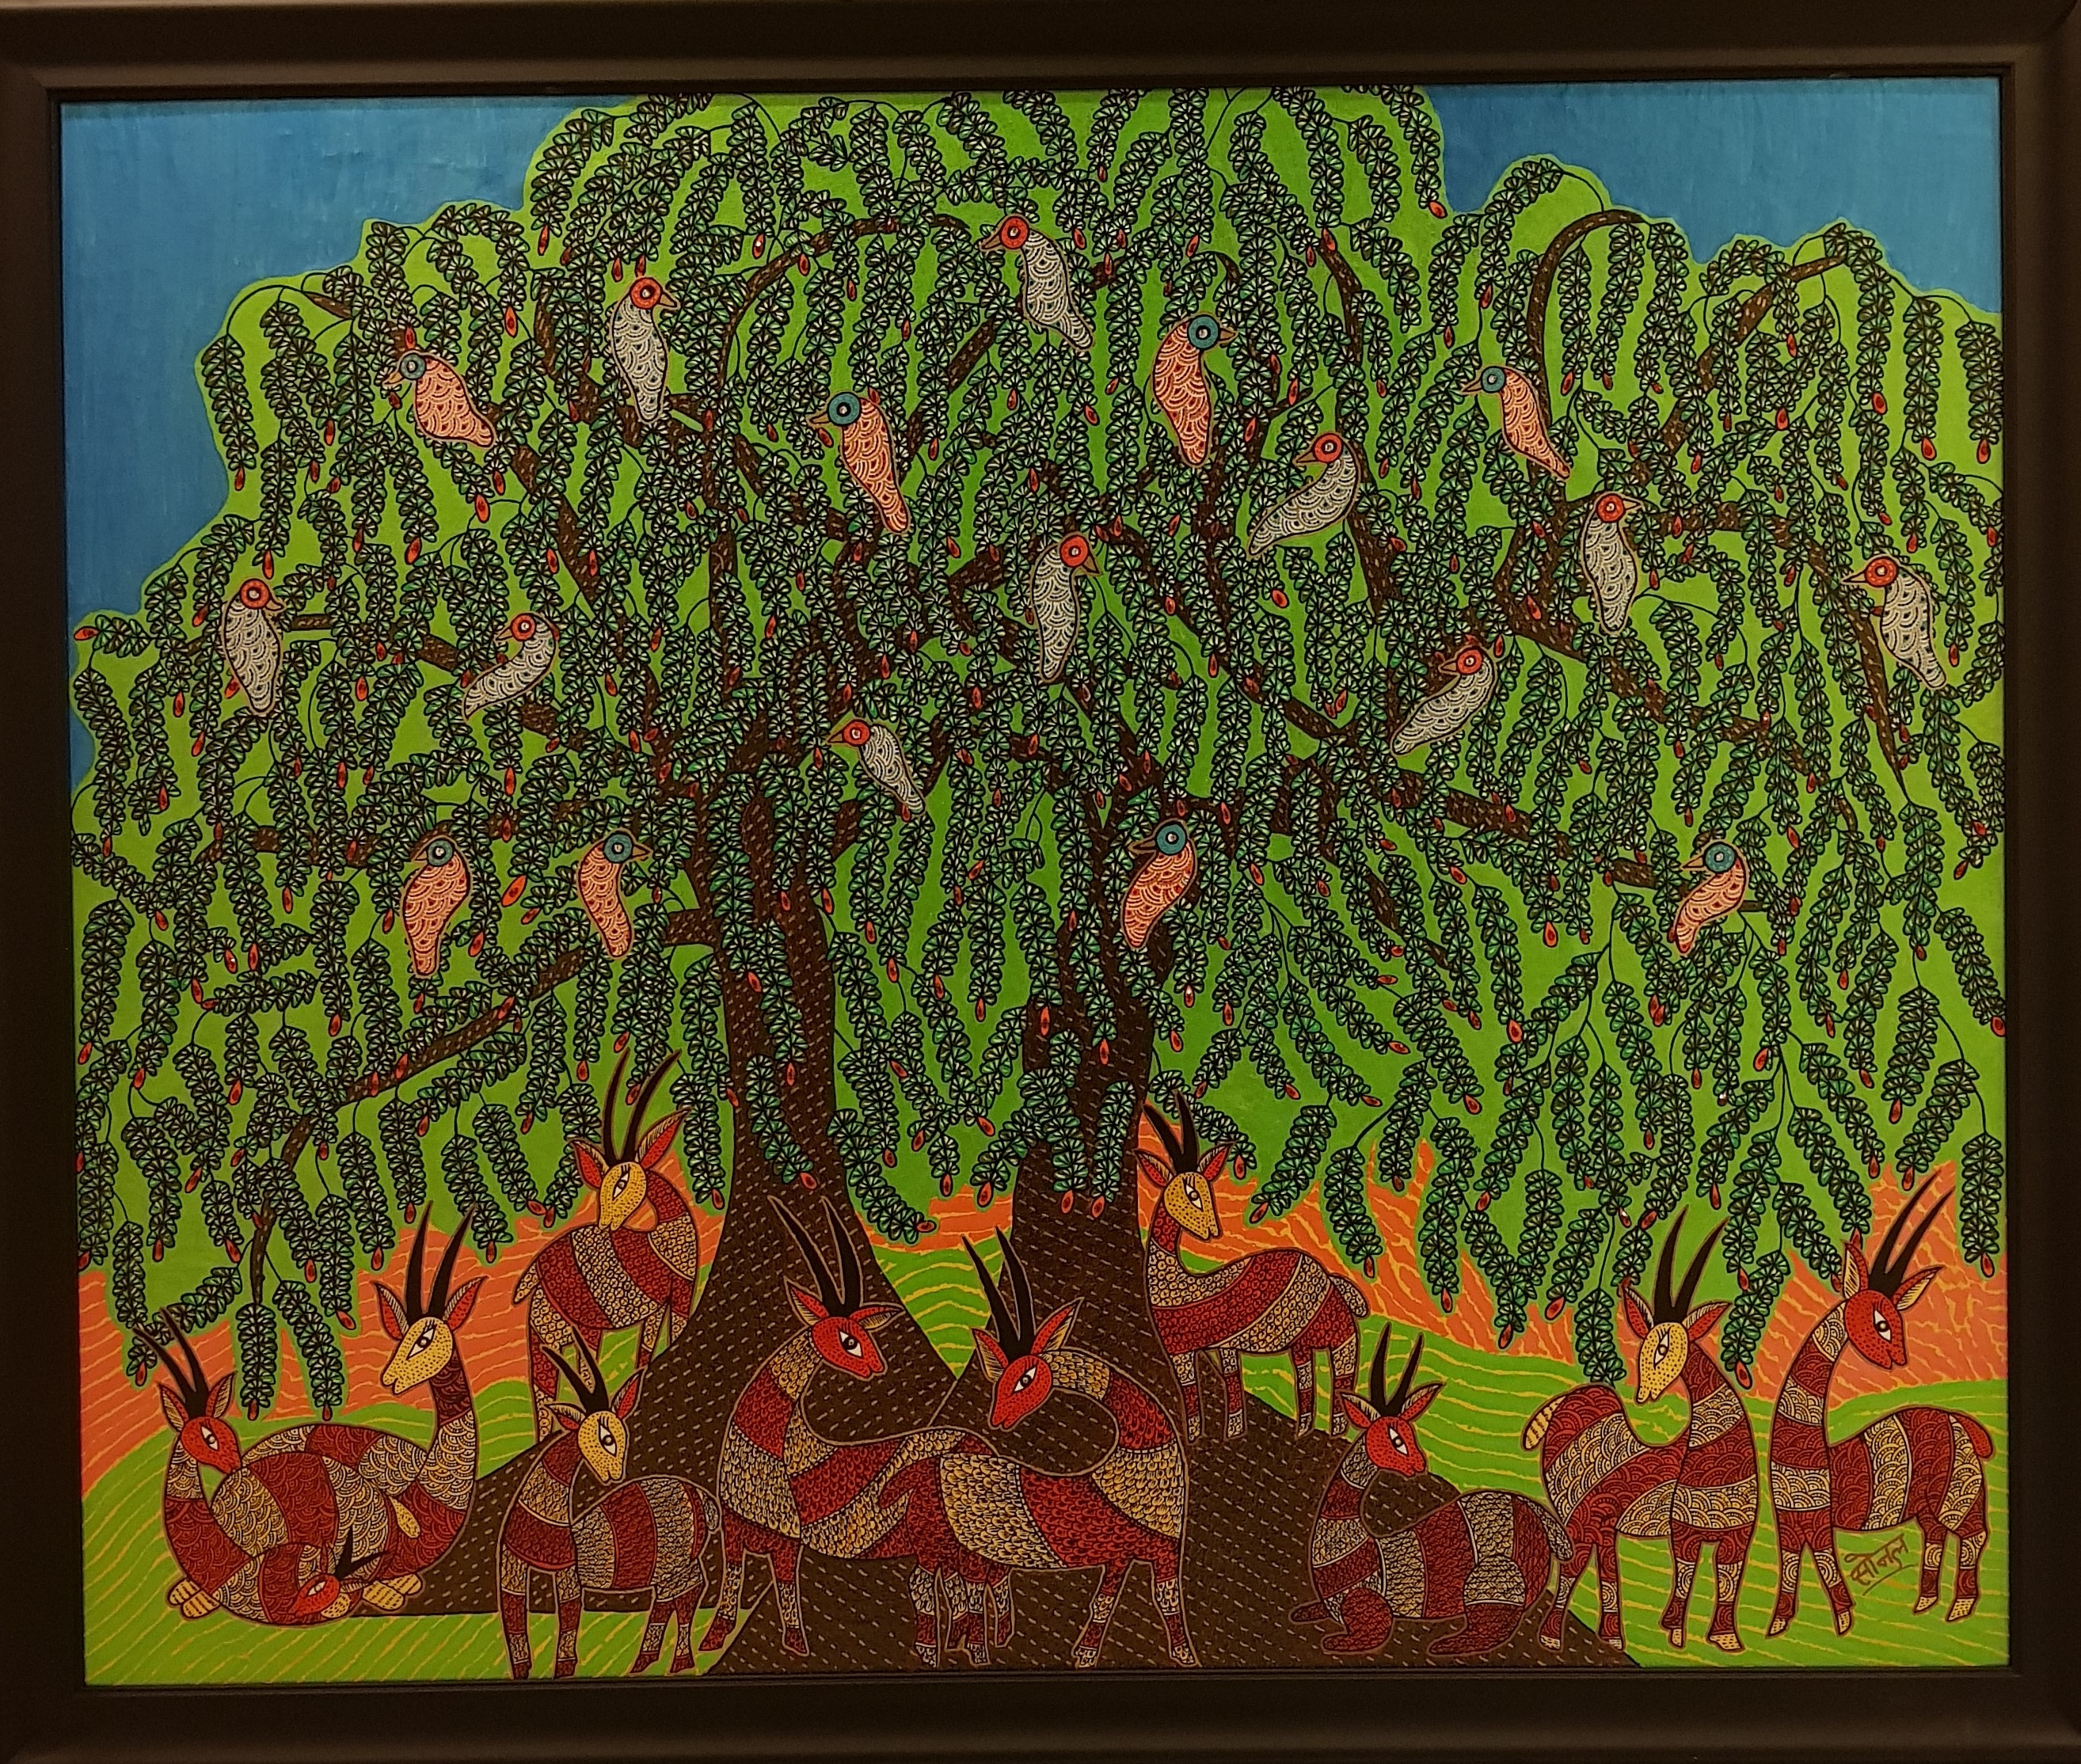 The Tree Of Life 2 (Gond Art)